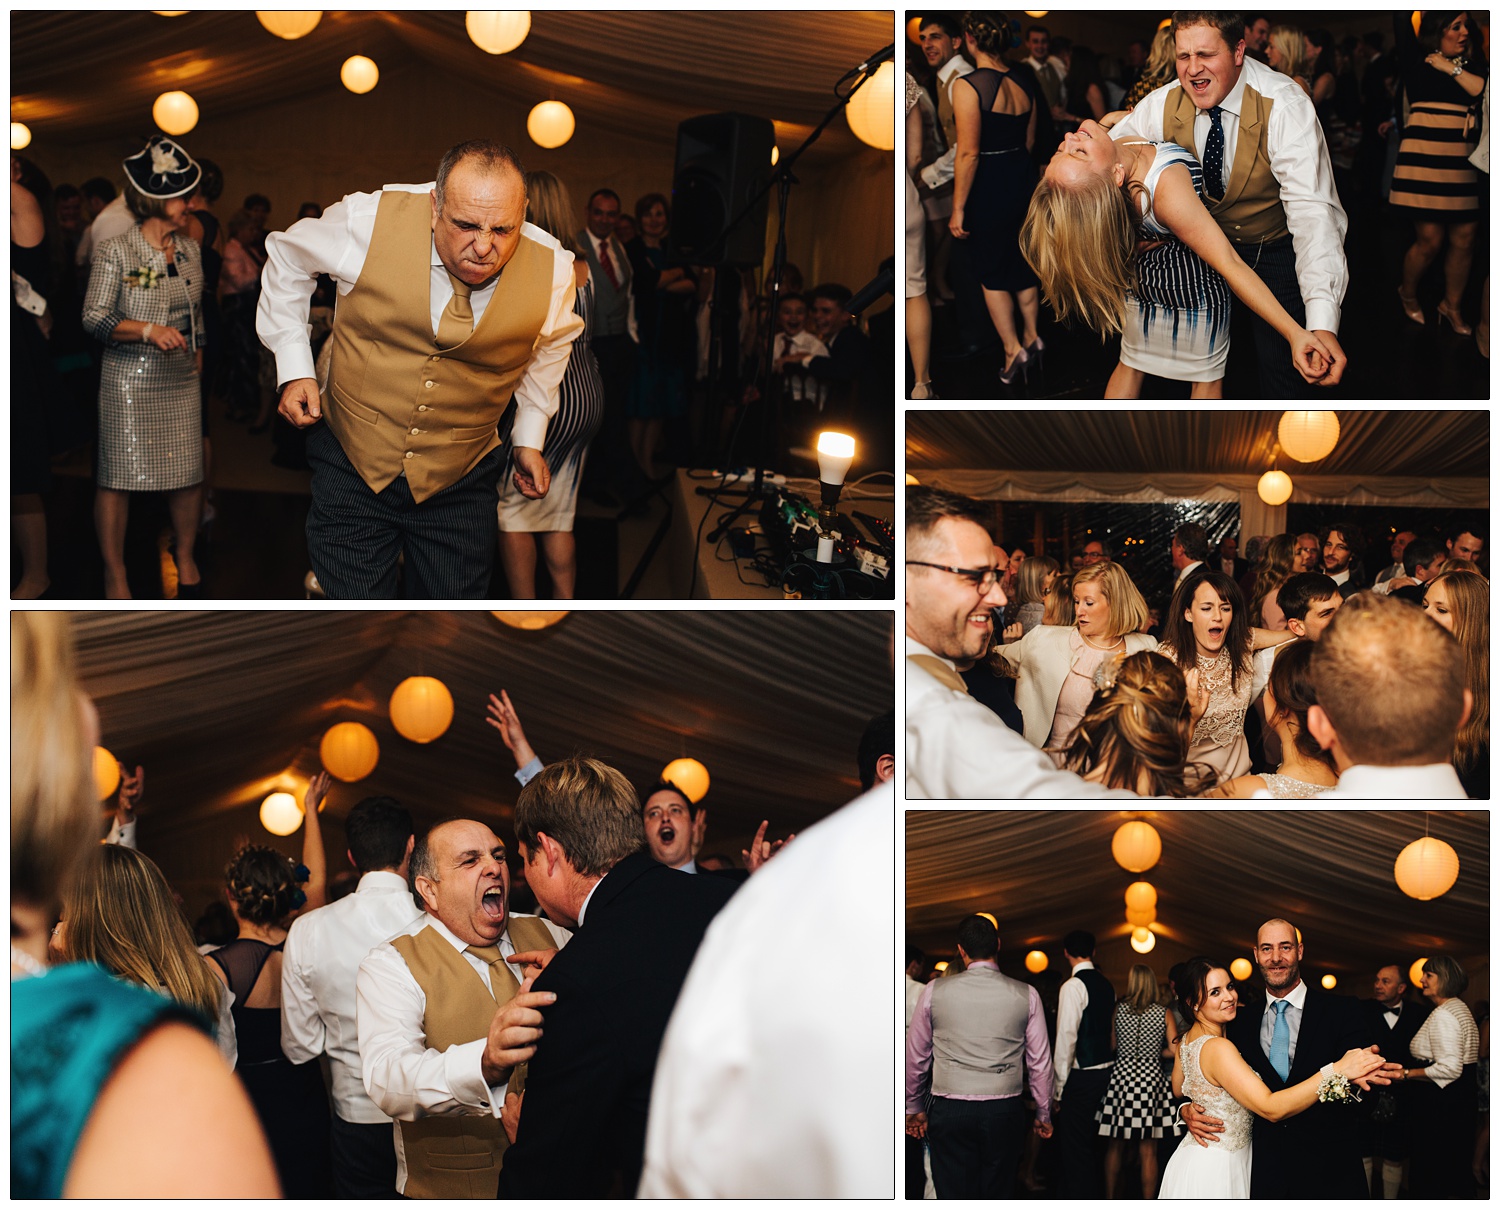 Father of the bride tearing up the dancefloor.